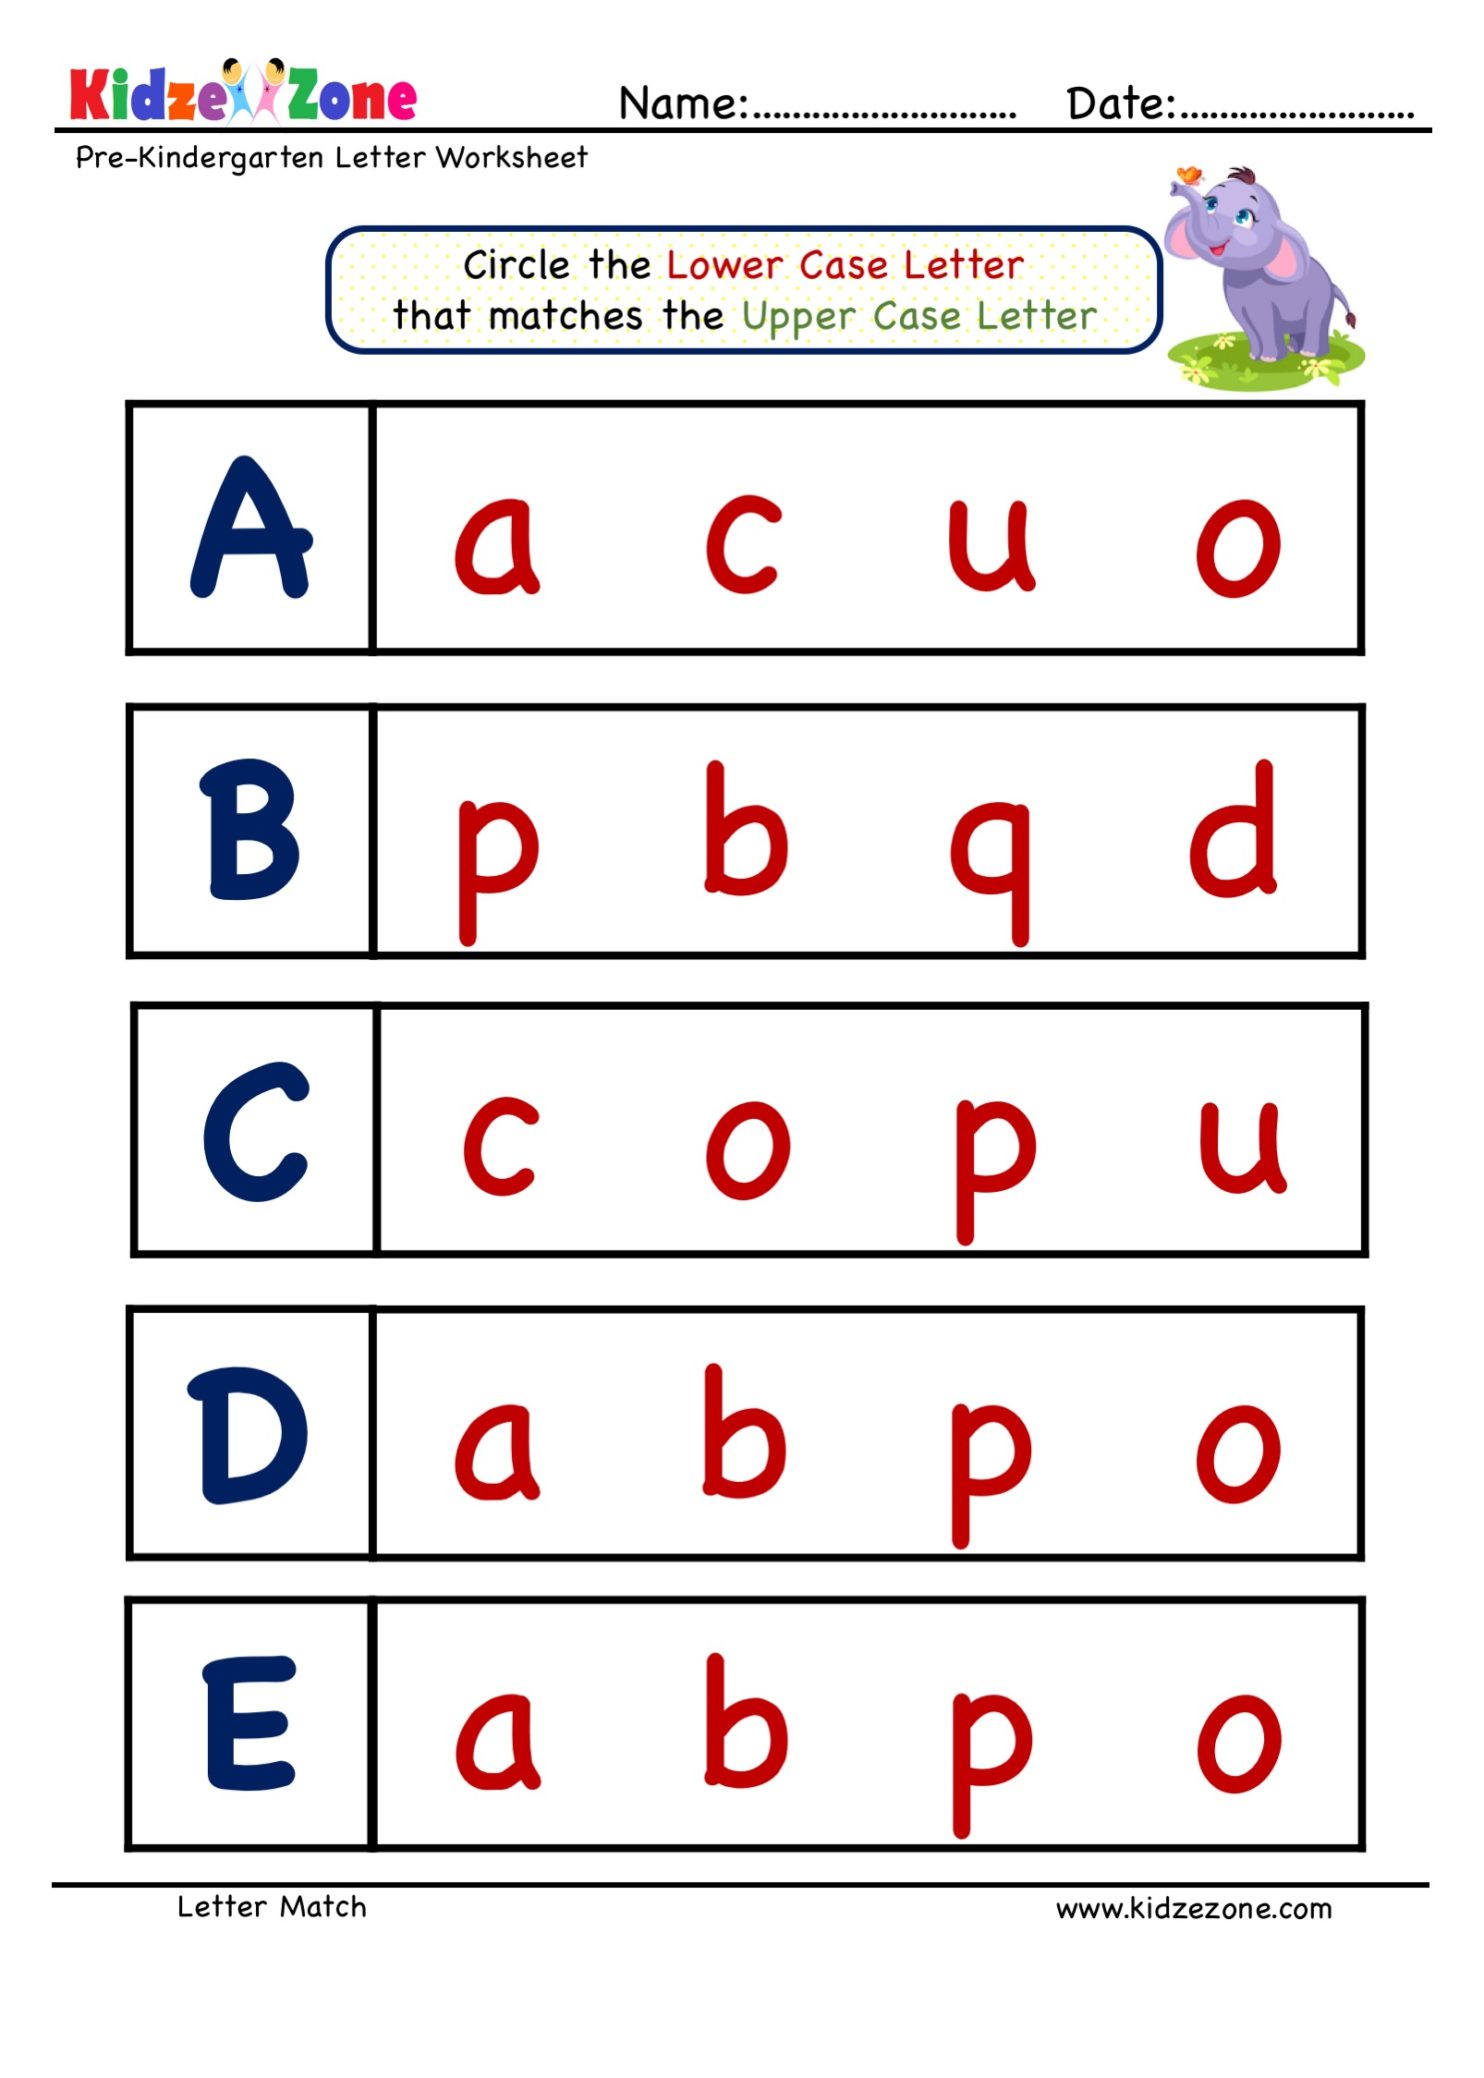 Preschool Letter Matching Upper Case To Lower Case A To E